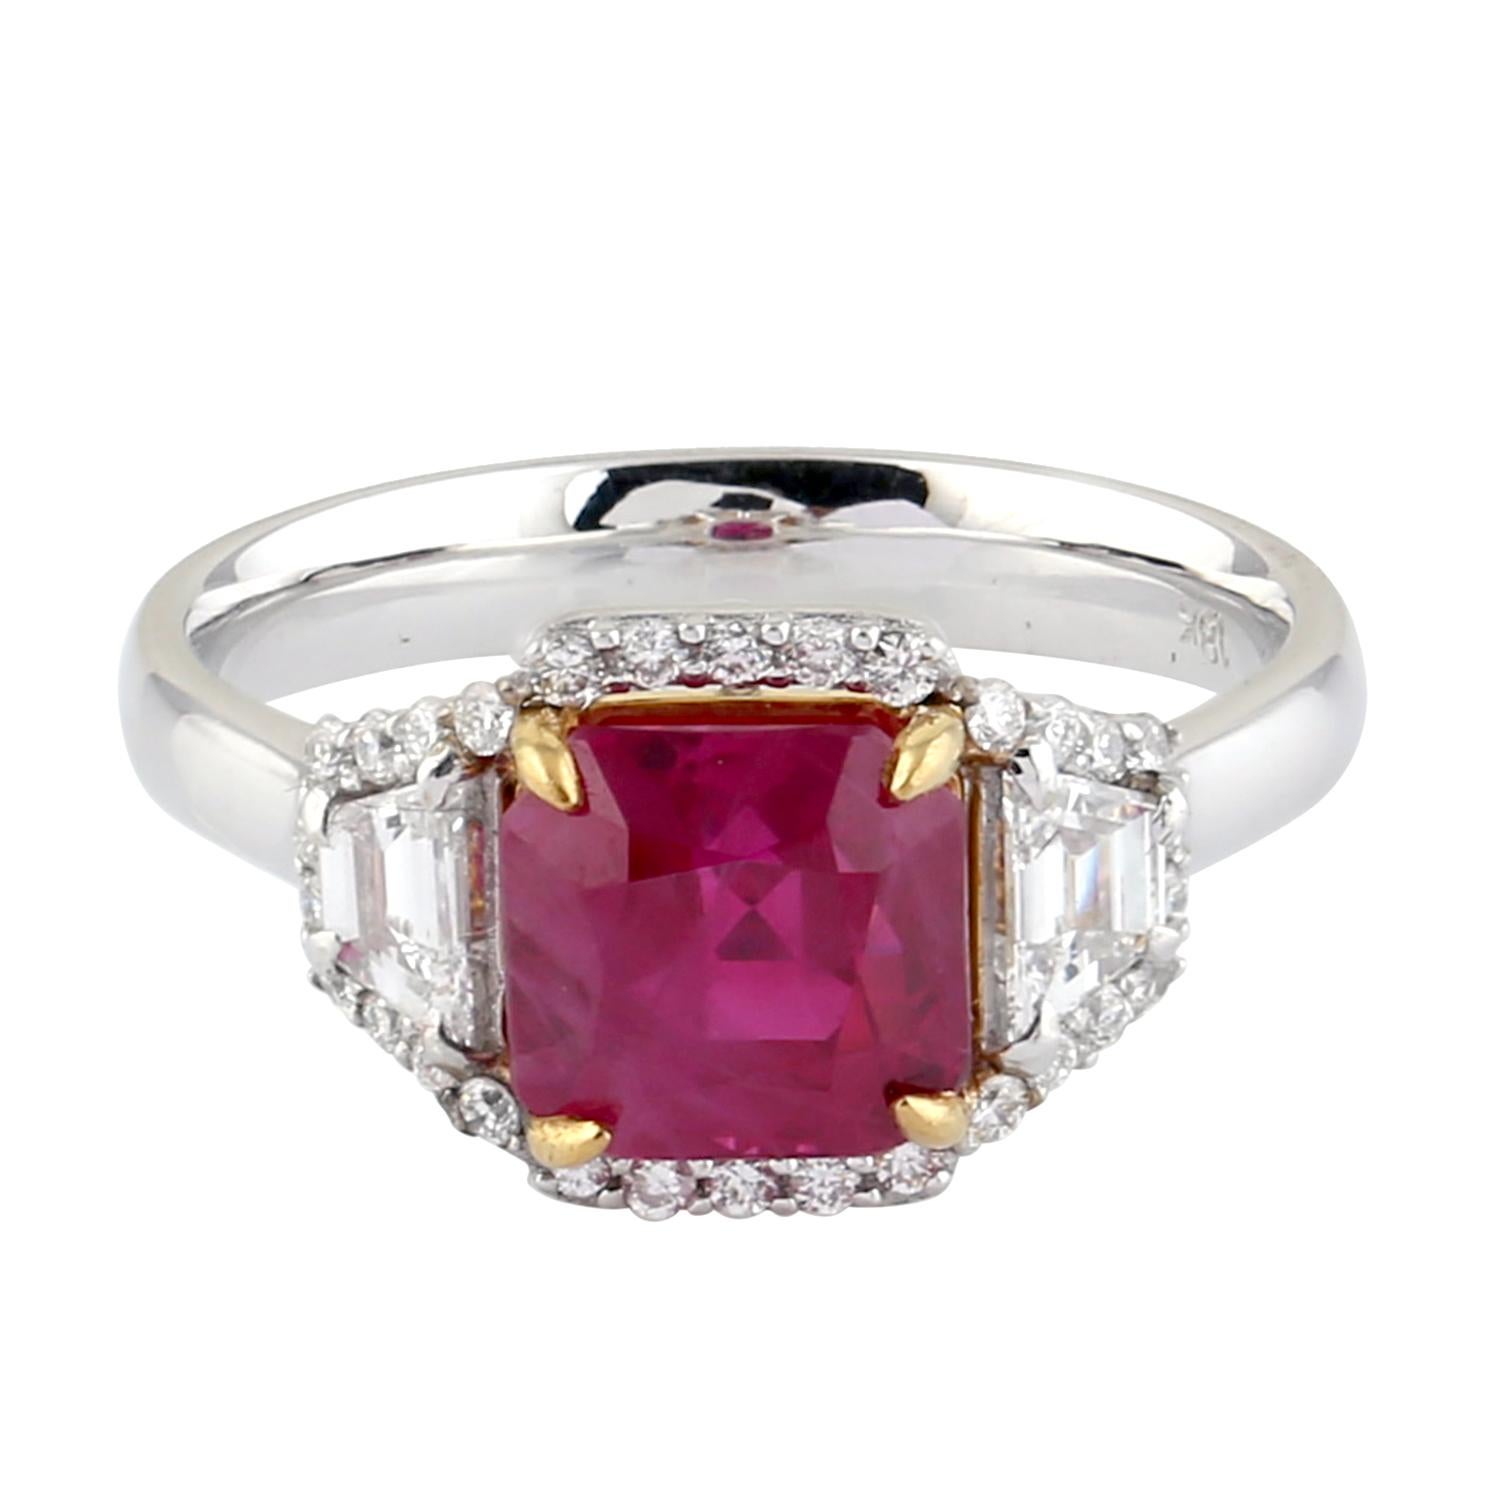 Artisan Cushion Shape Ruby and Diamond Cocktail Ring in 18K White Gold